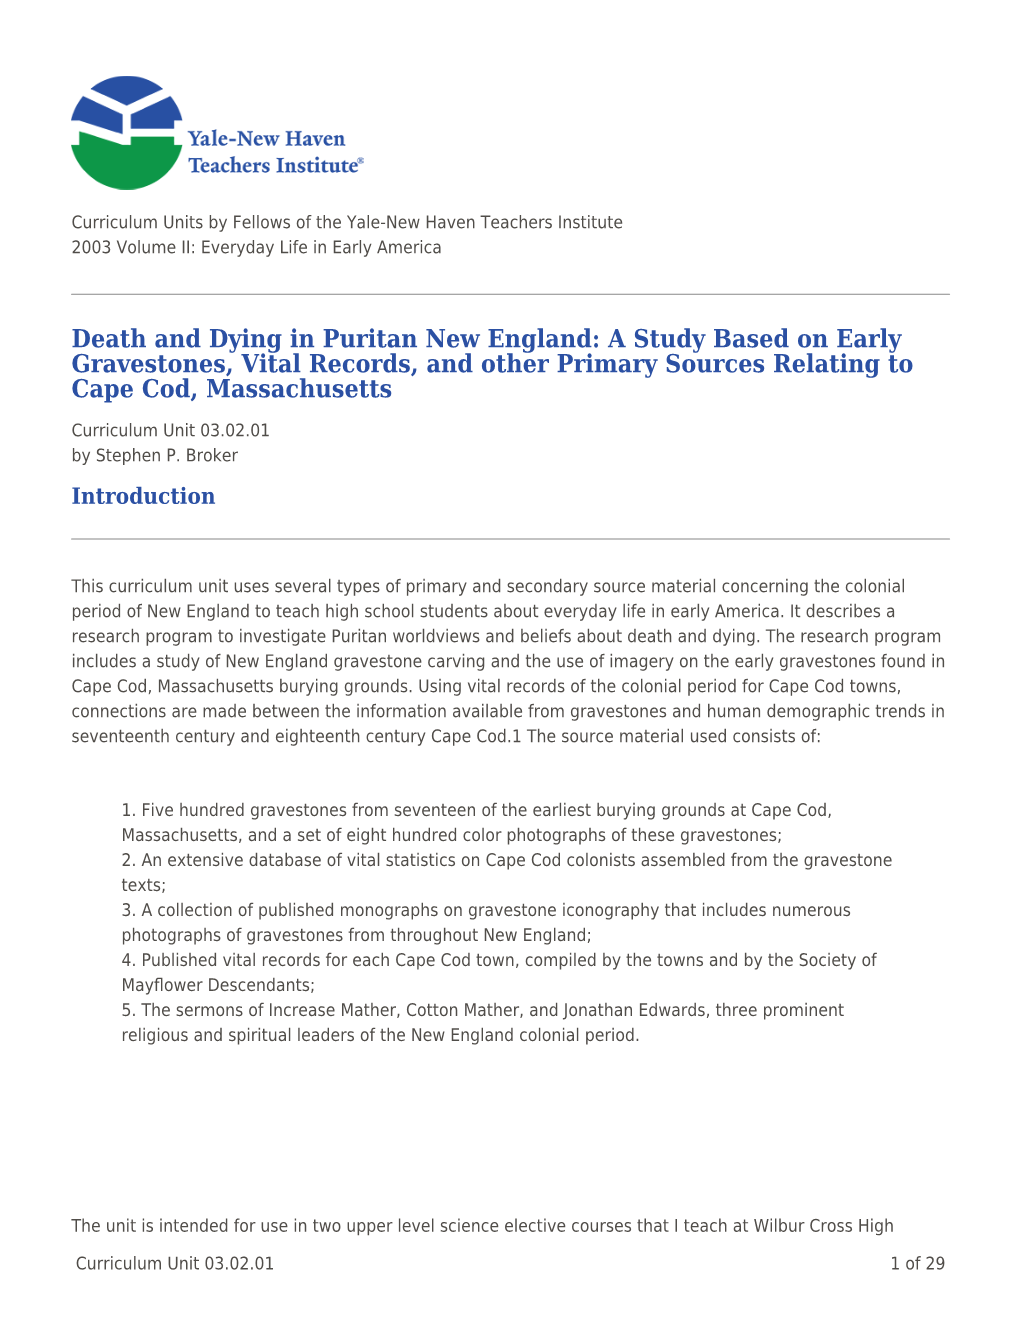 Death and Dying in Puritan New England: a Study Based on Early Gravestones, Vital Records, and Other Primary Sources Relating to Cape Cod, Massachusetts